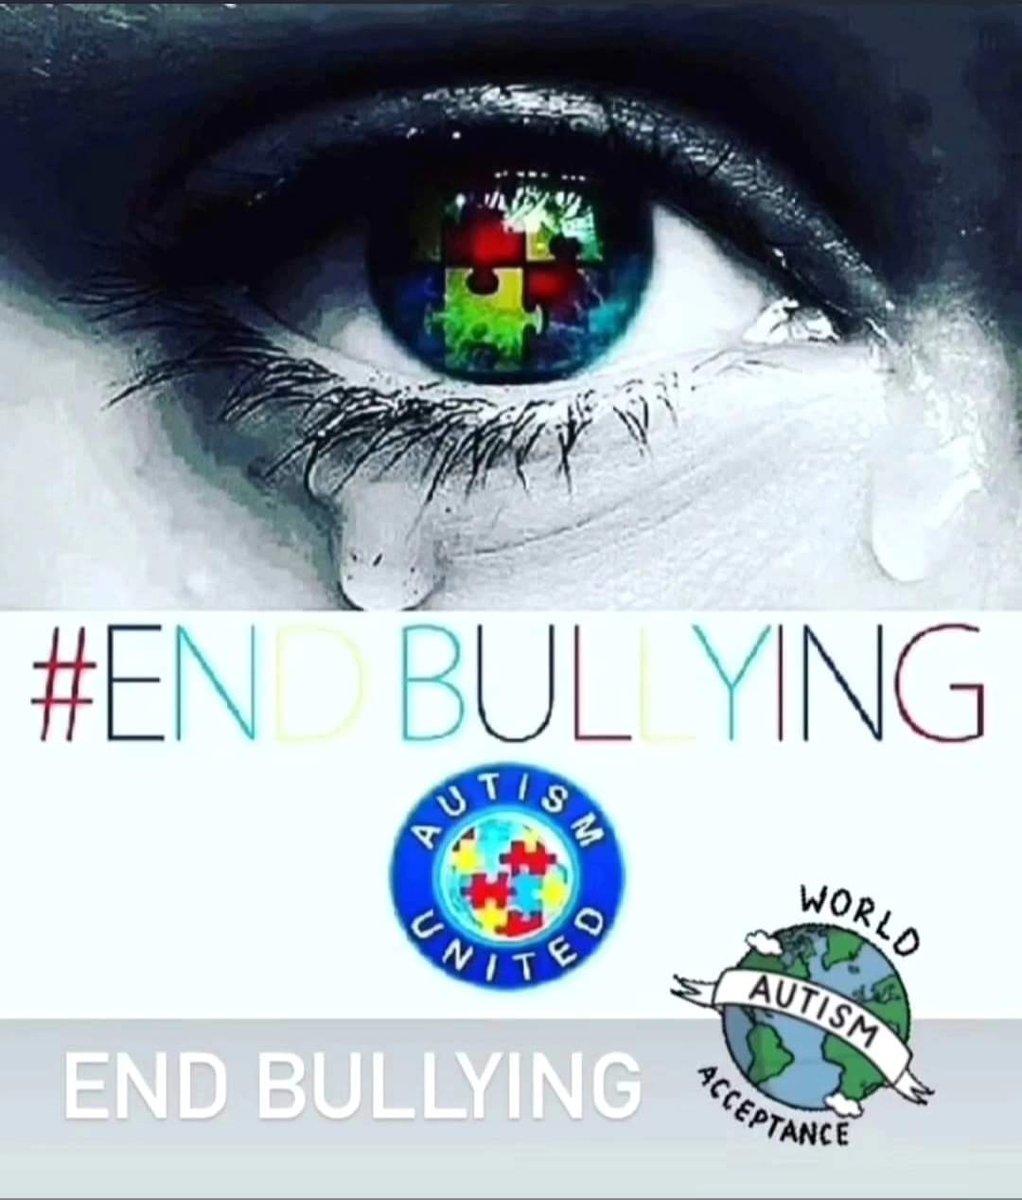 🗣 #endbullying Just so you know 🤔💙❤💚💜 #autismacceptance 🙌🏽 Every day is autism awareness day in our house #autism #autismdad #autismawareness #autismawarenessmonth #autismfamily #autismparent #autismrocks #differentnotless 🙋🏽‍♂️🙋‍♀️ Let's Band together to raise awareness 🙏👊🌍